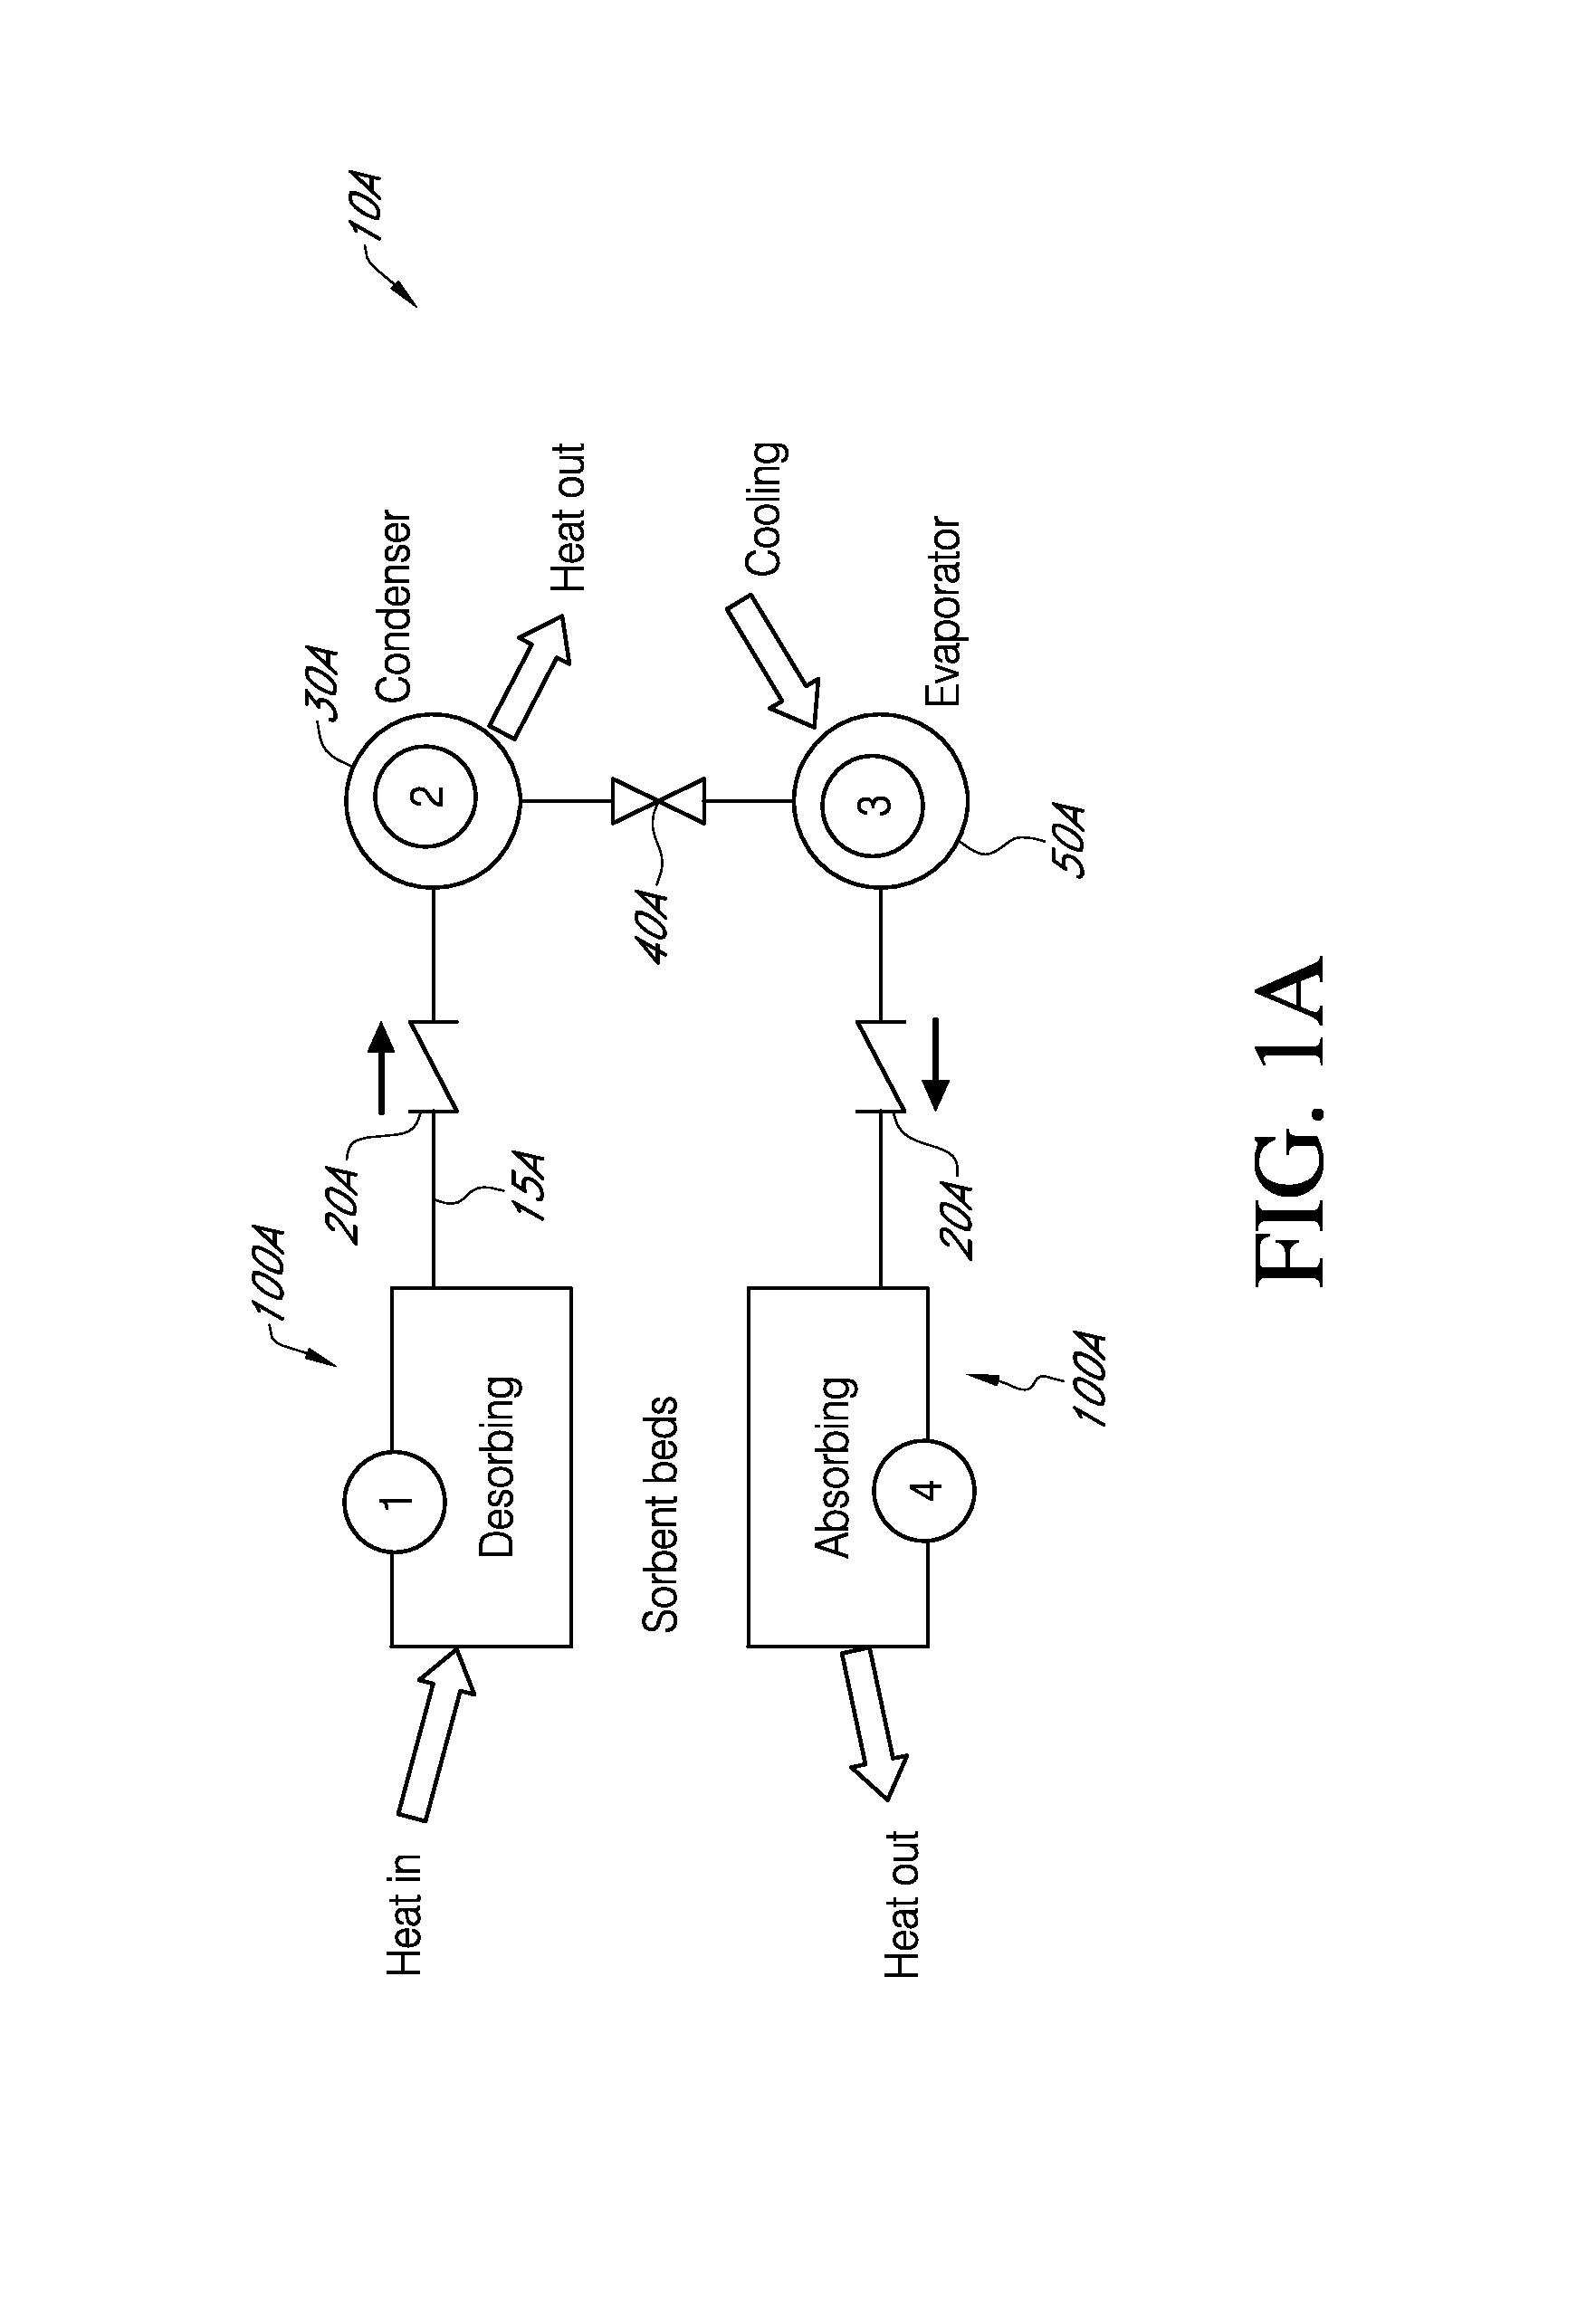 Systems, devices and methods for gas distribution in a sorber